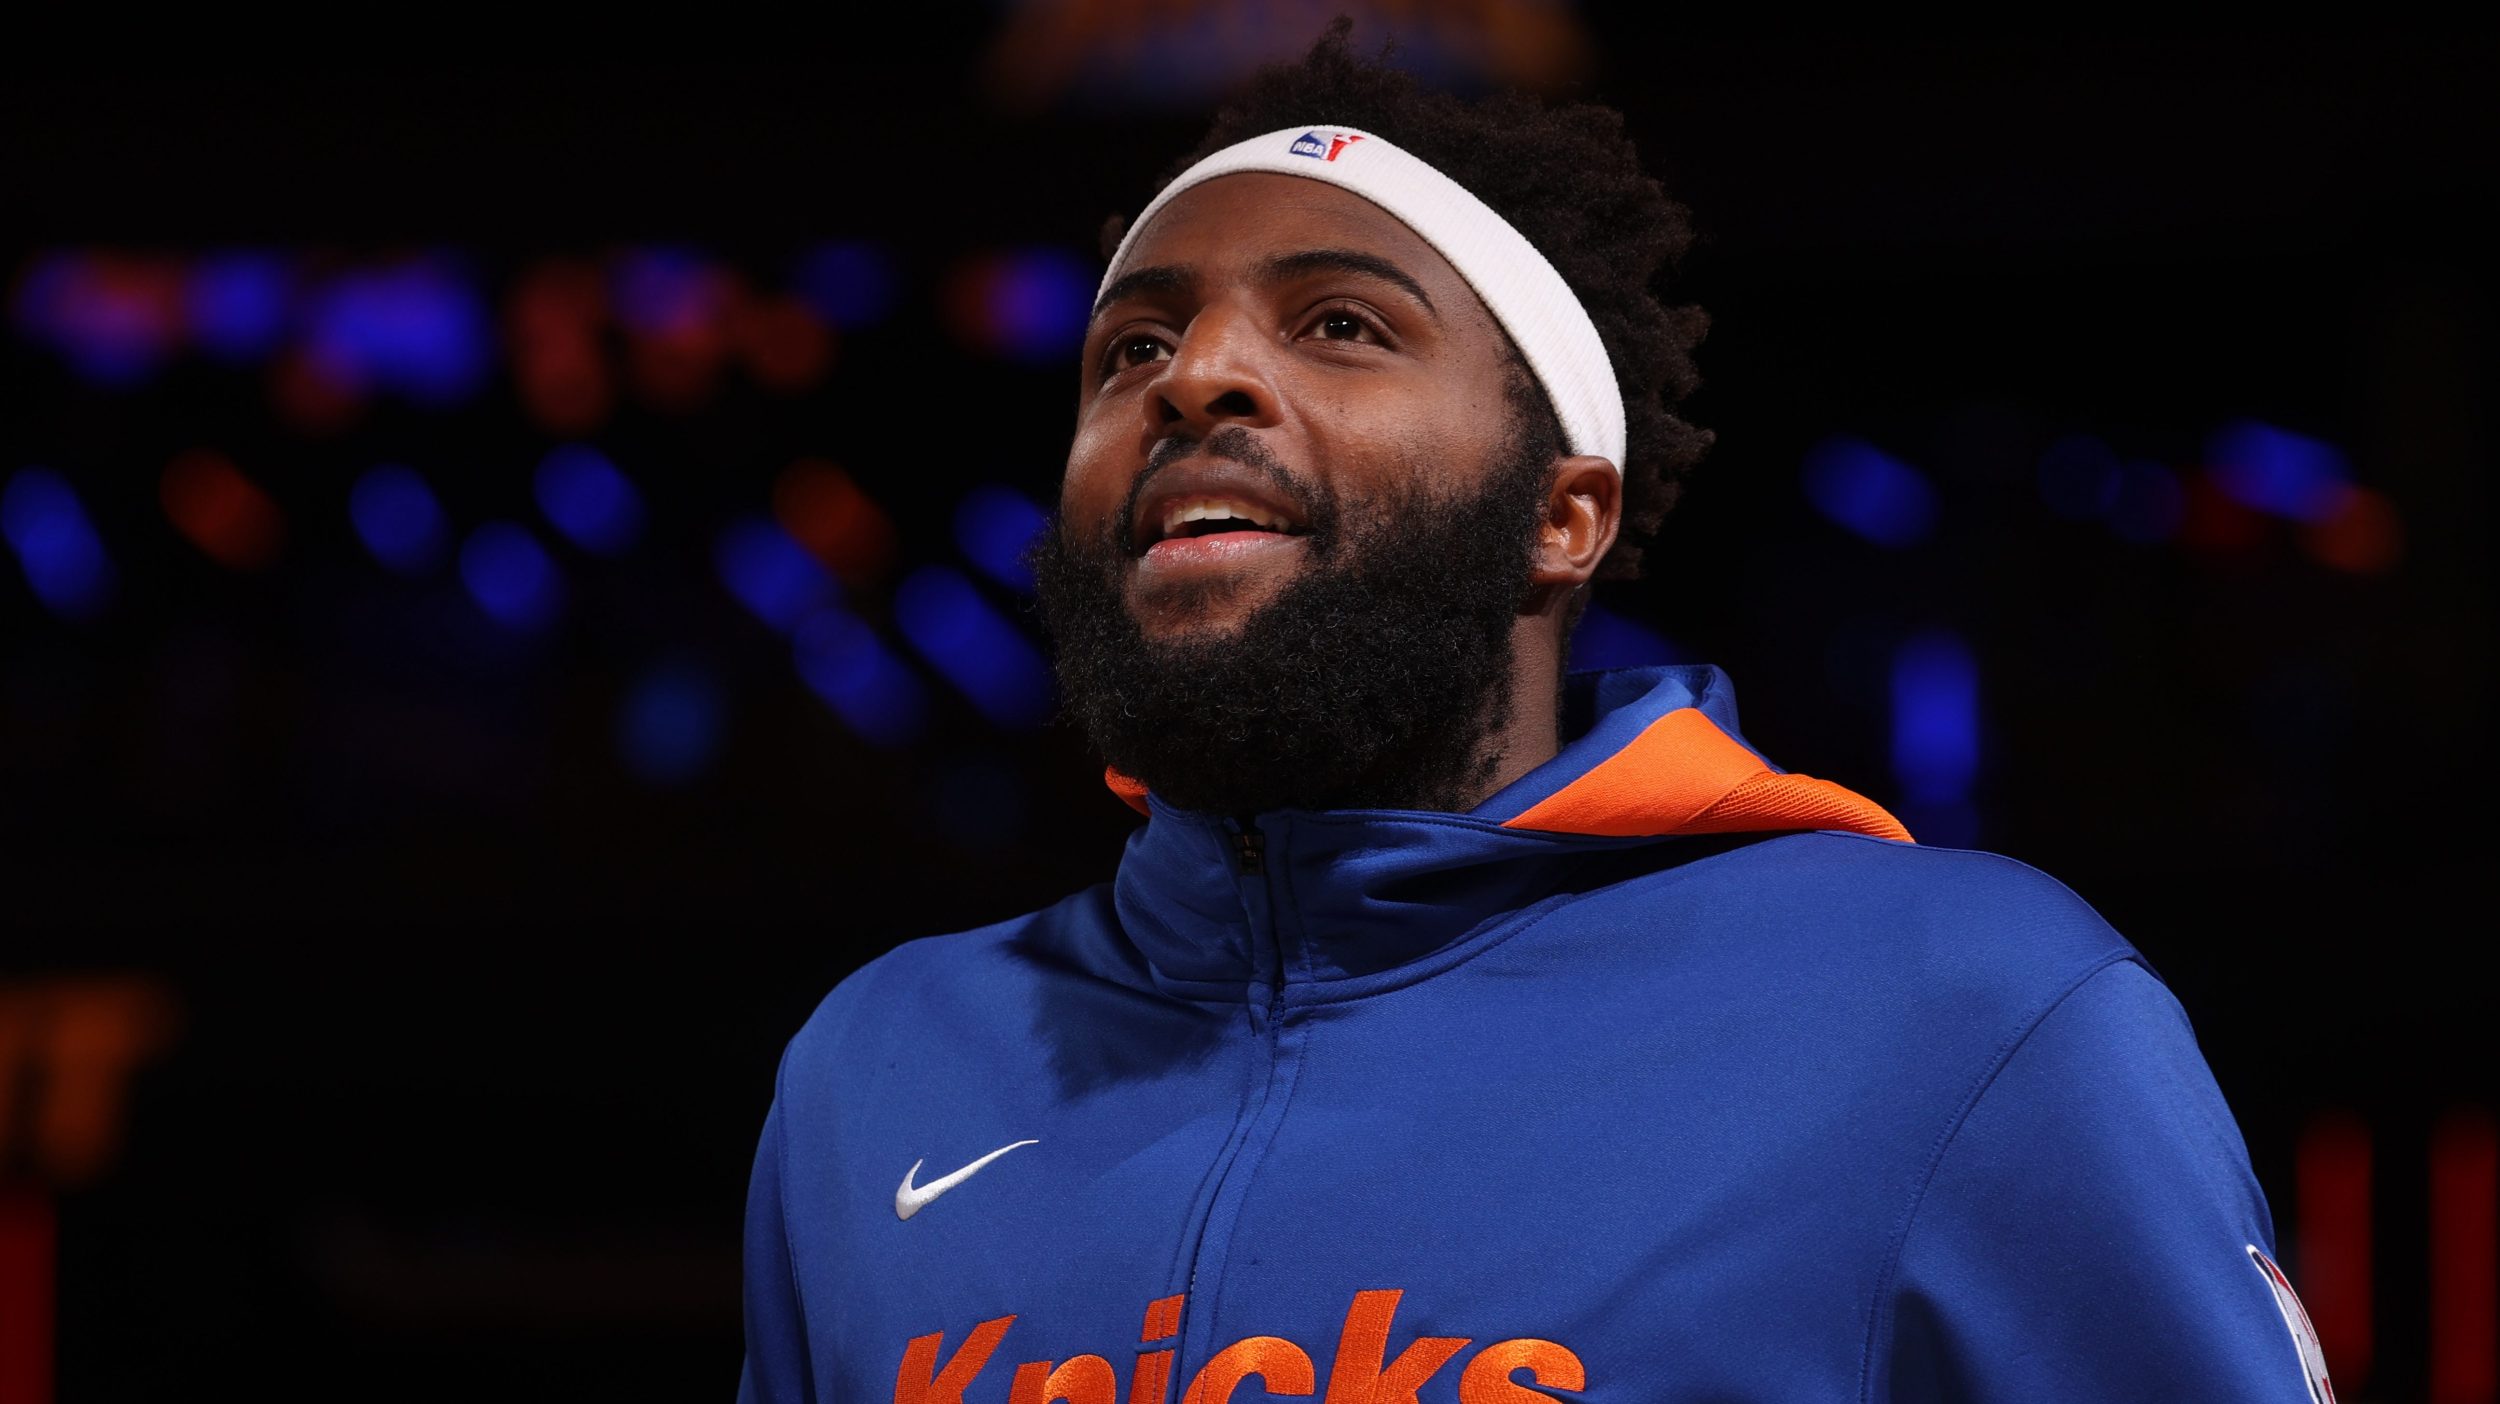 Mitchell Robinson #23 of the New York Knicks smiles before the game against the Atlanta Hawks on November 2, 2022 at Madison Square Garden in New York City, New York.